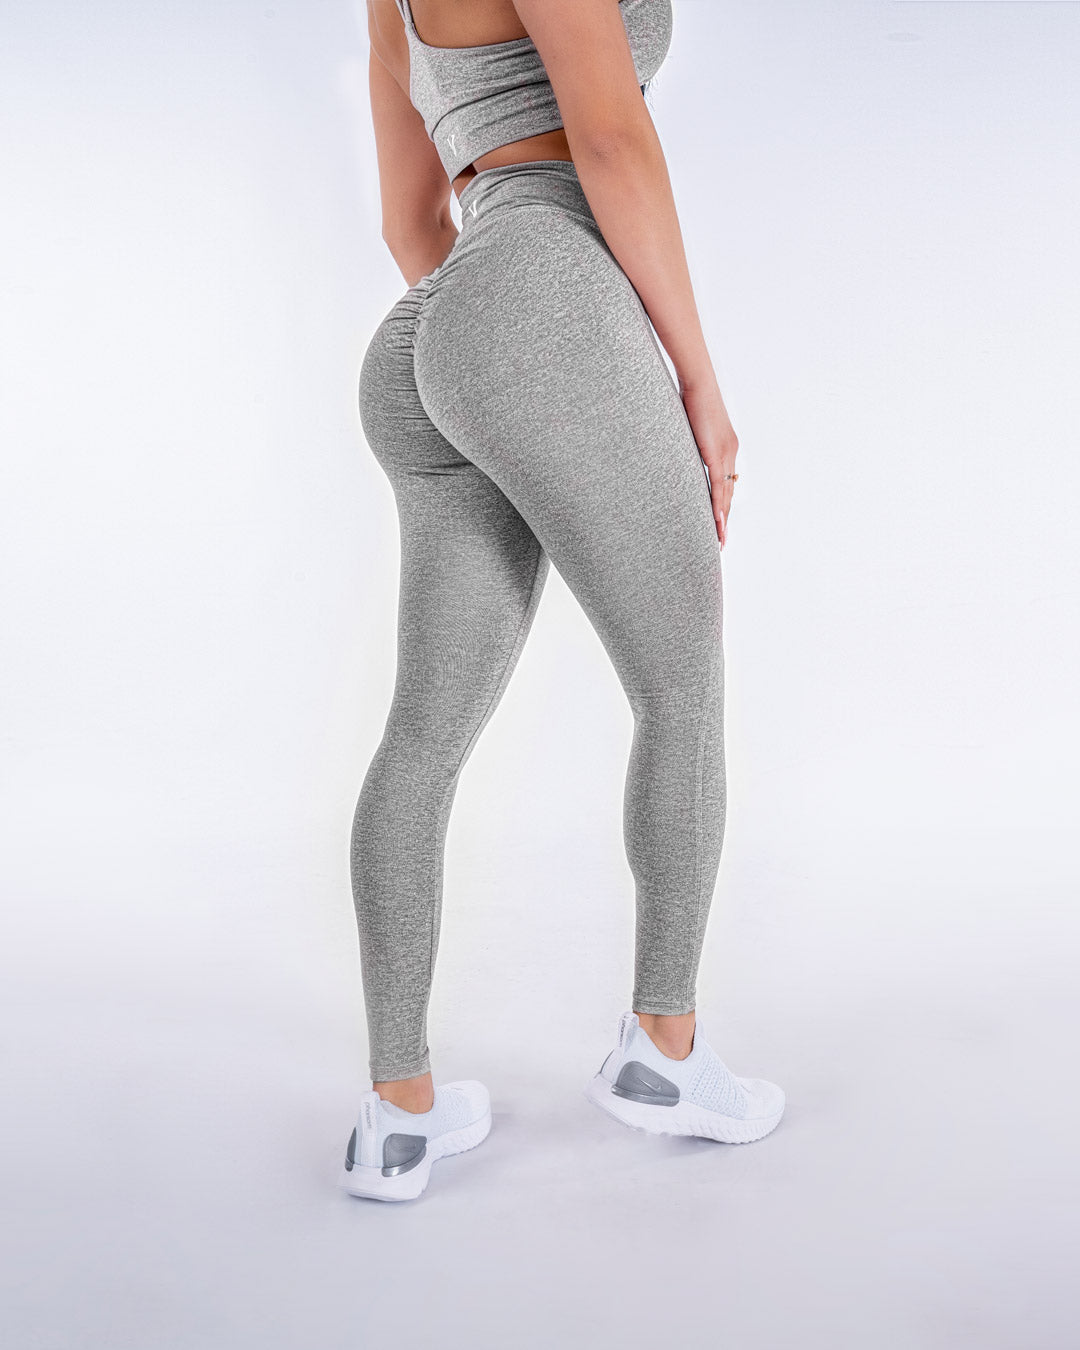 Assria Signature Scrunch Booty Leggings - Heather Grey - Vivd Collection